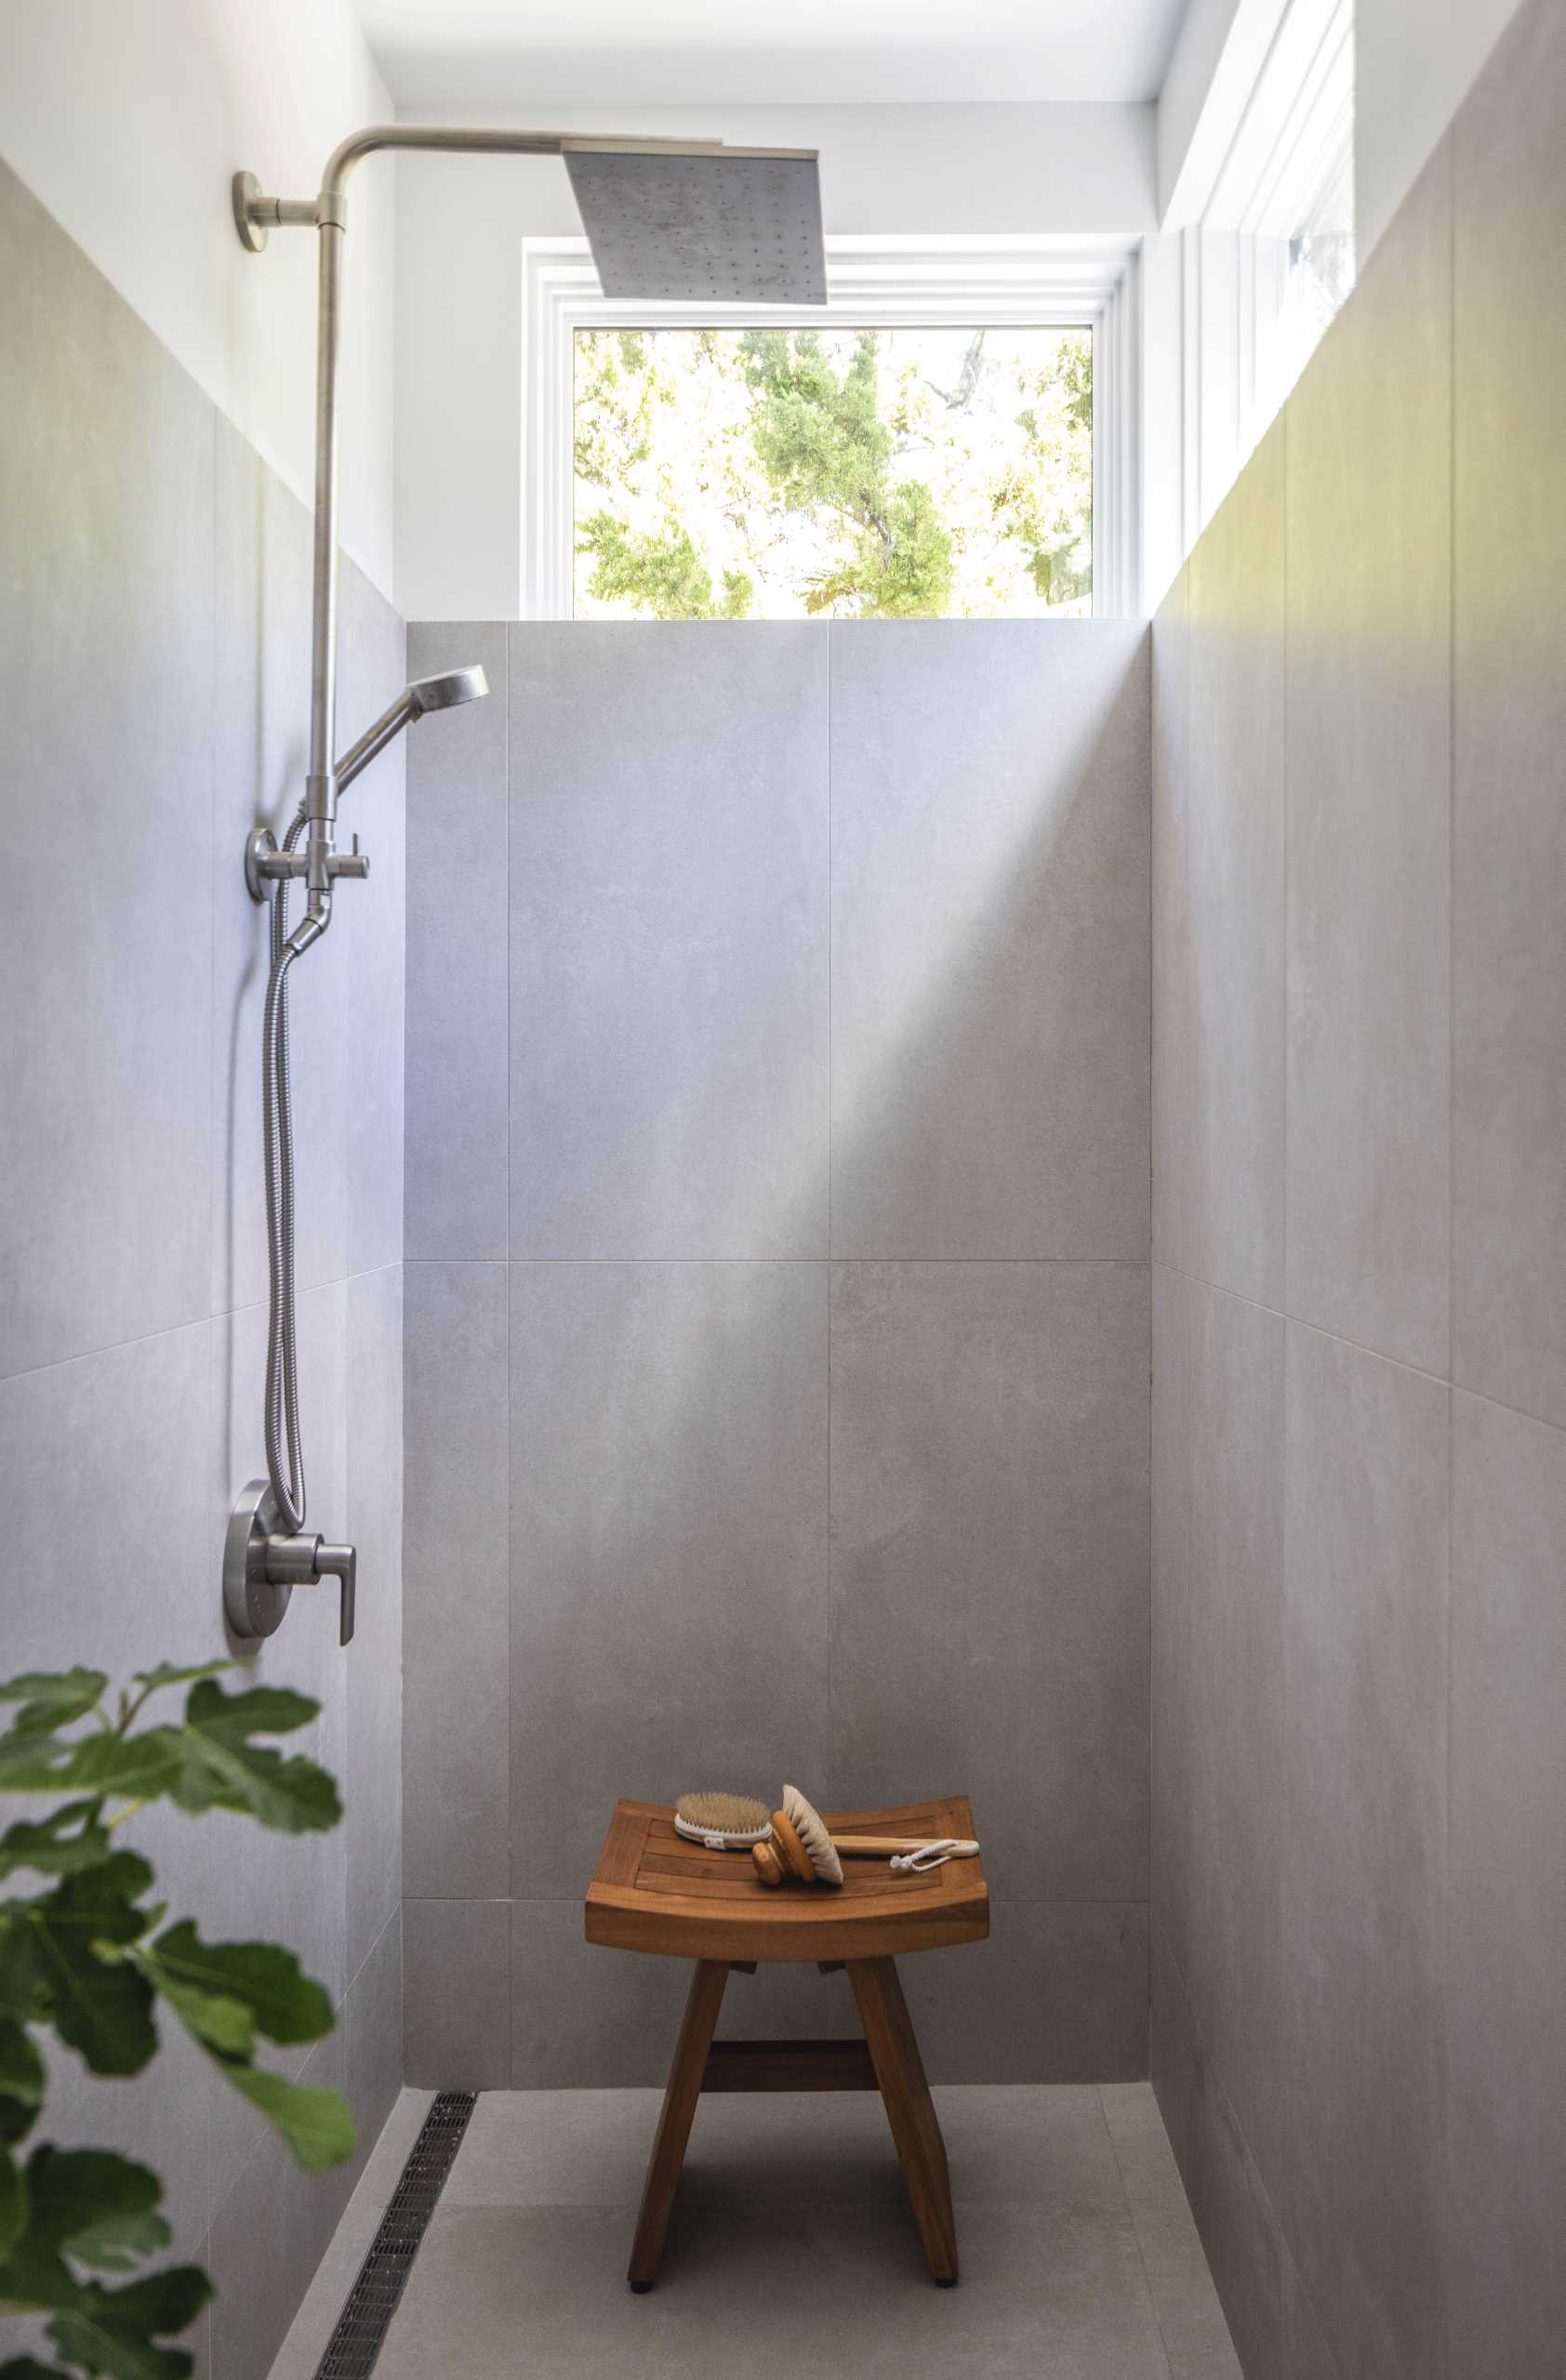 A modern shower with windows at the top of the wall.